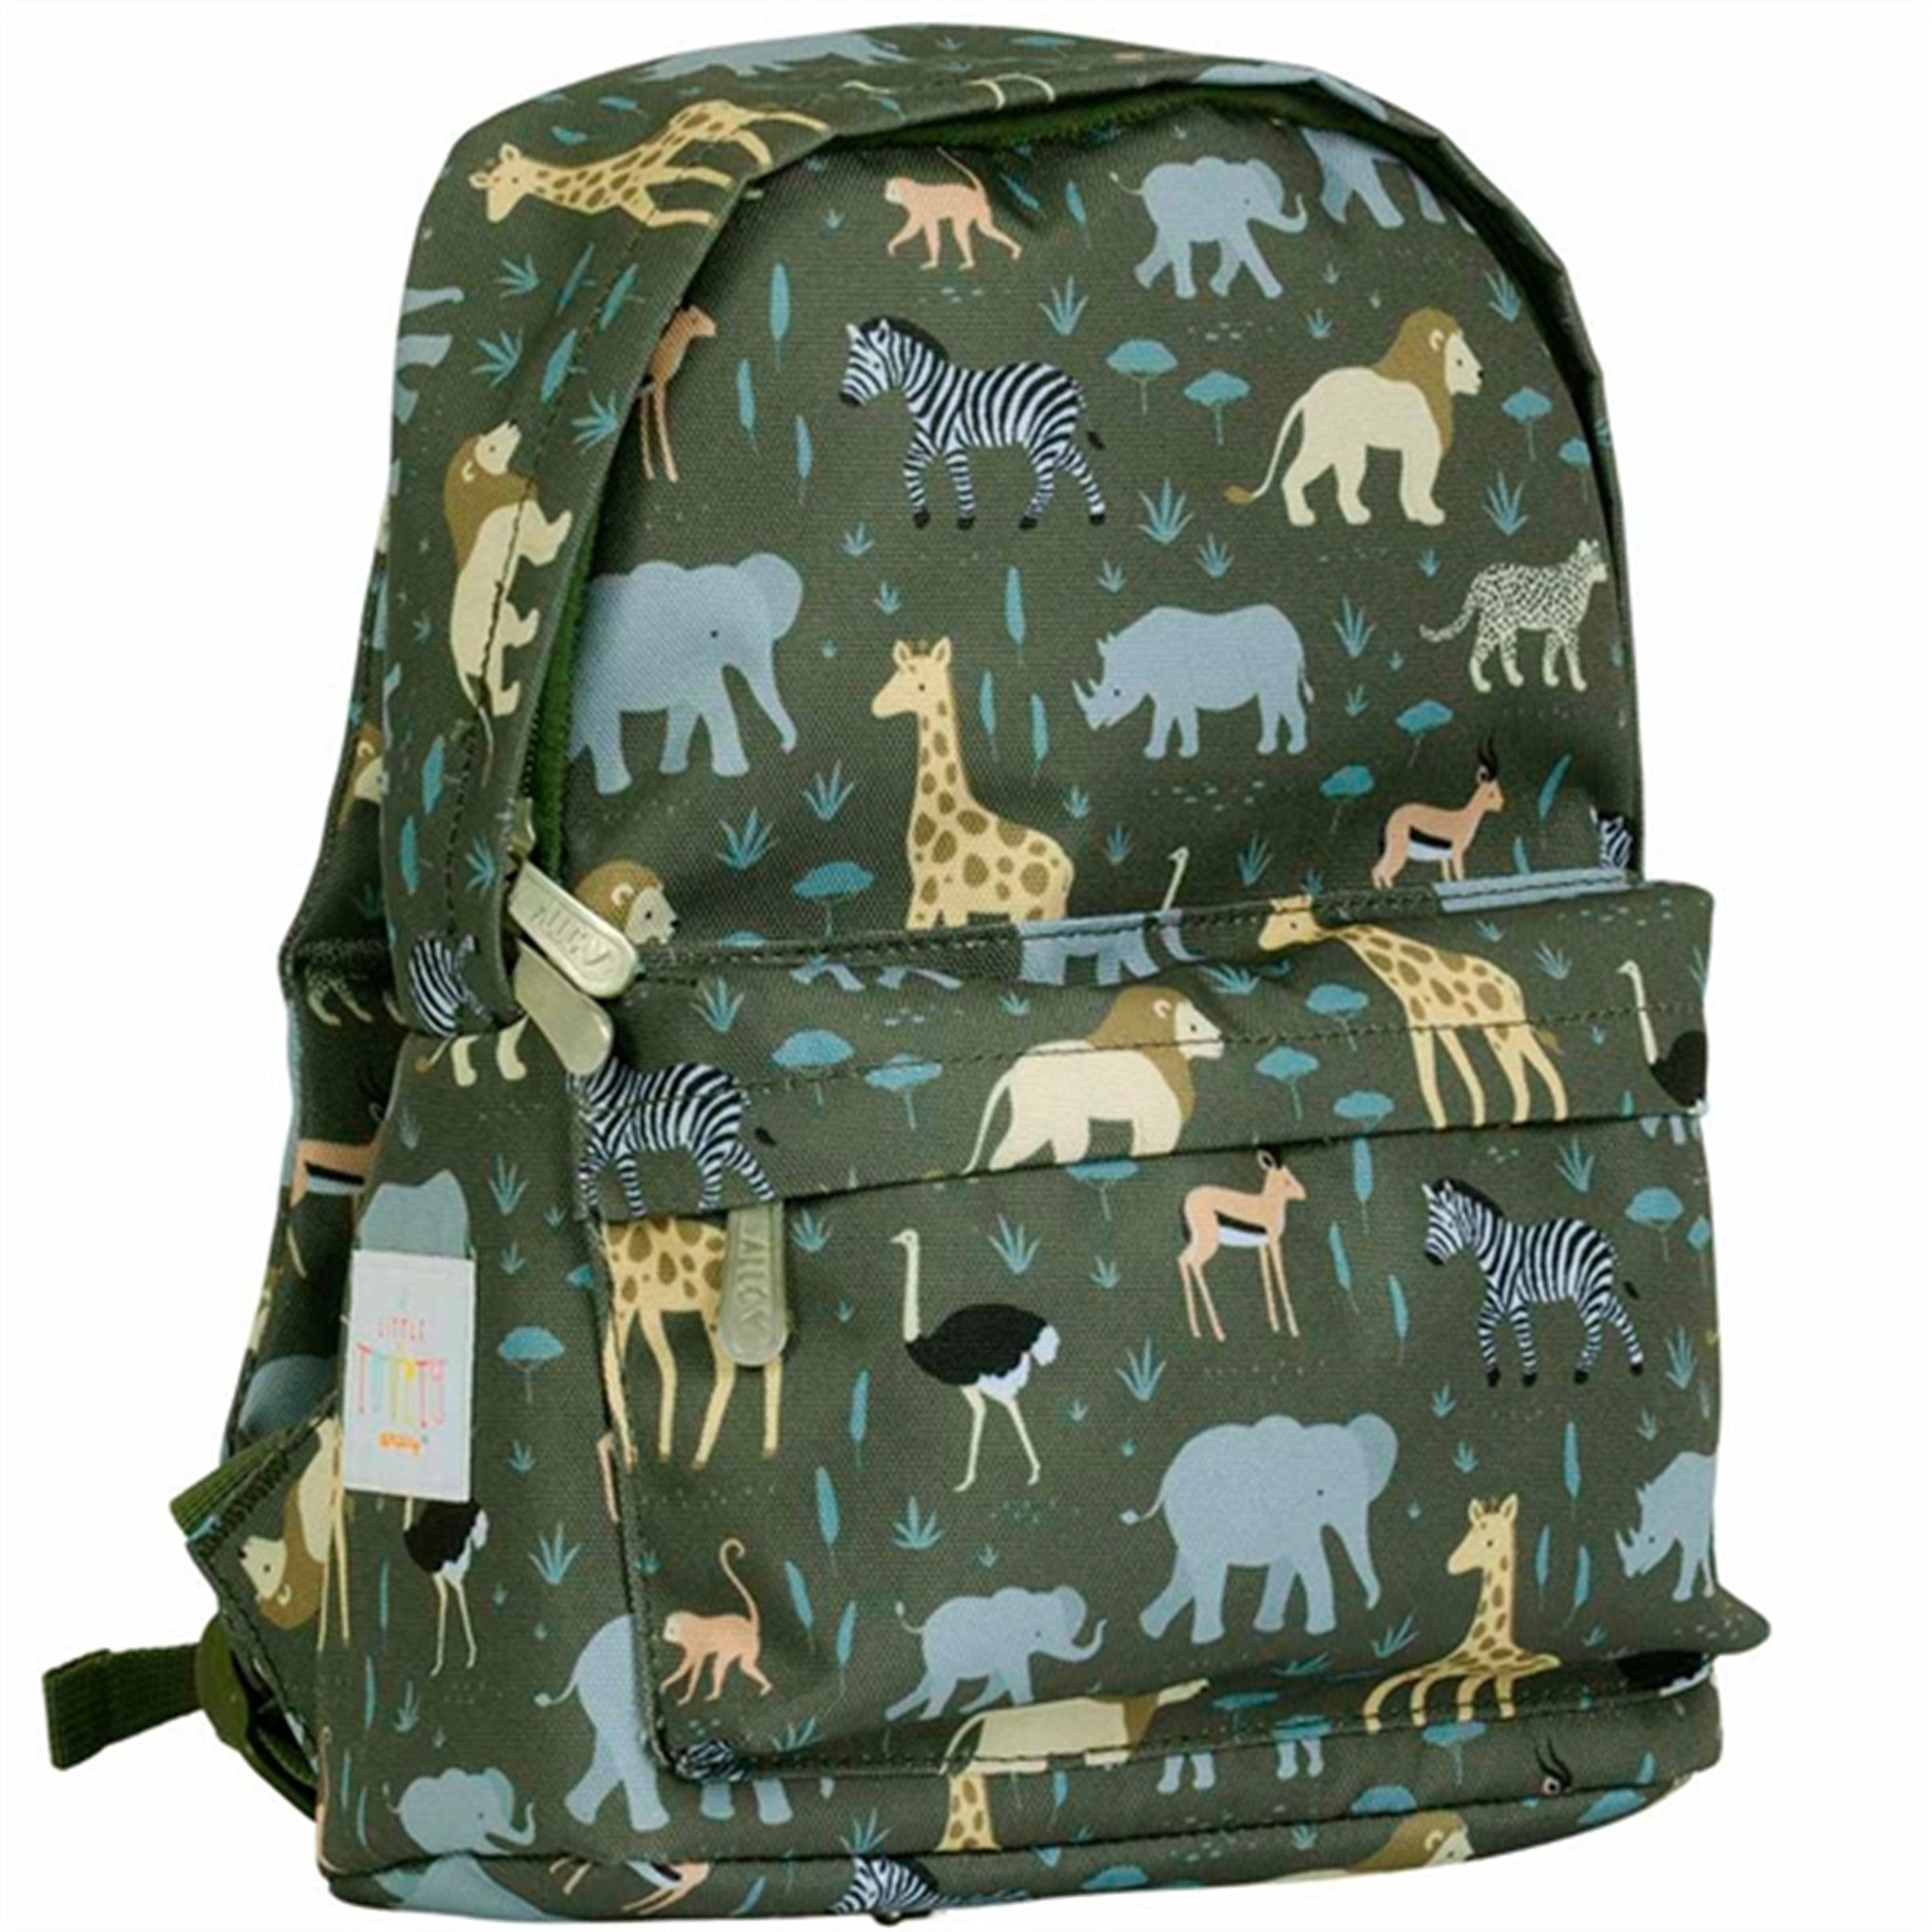 A Little Lovely Company Backpack Small Savanna 2